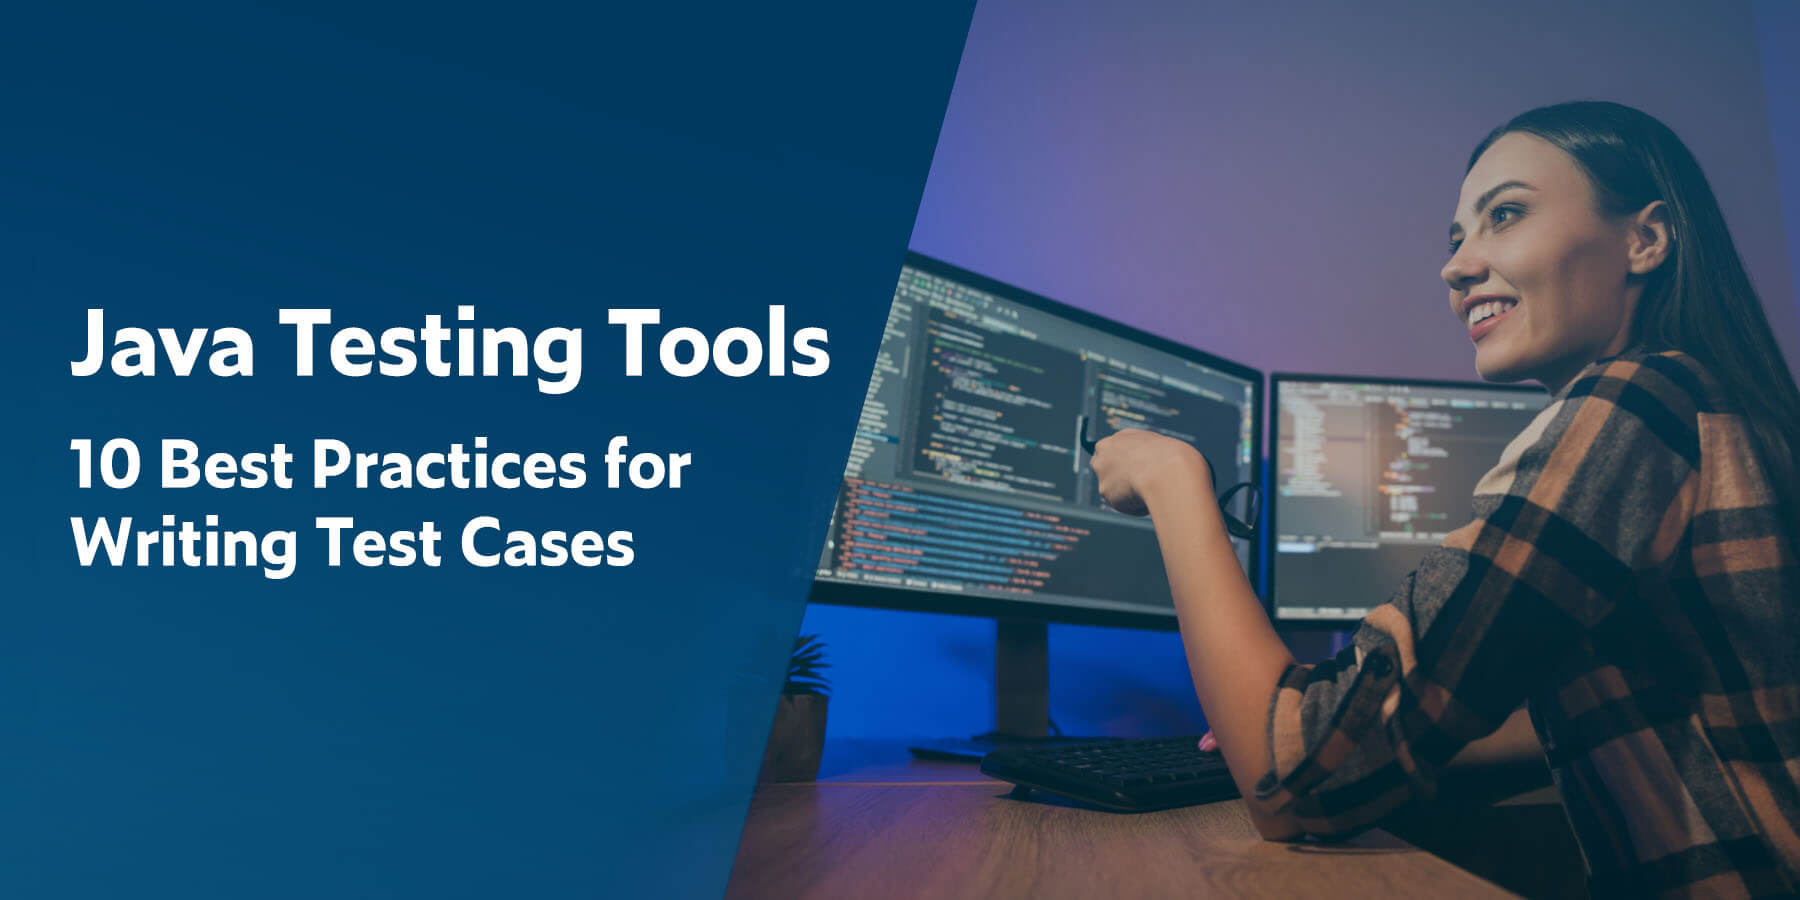 Java Testing Tools: 10 Best Practices for Writing Test Cases